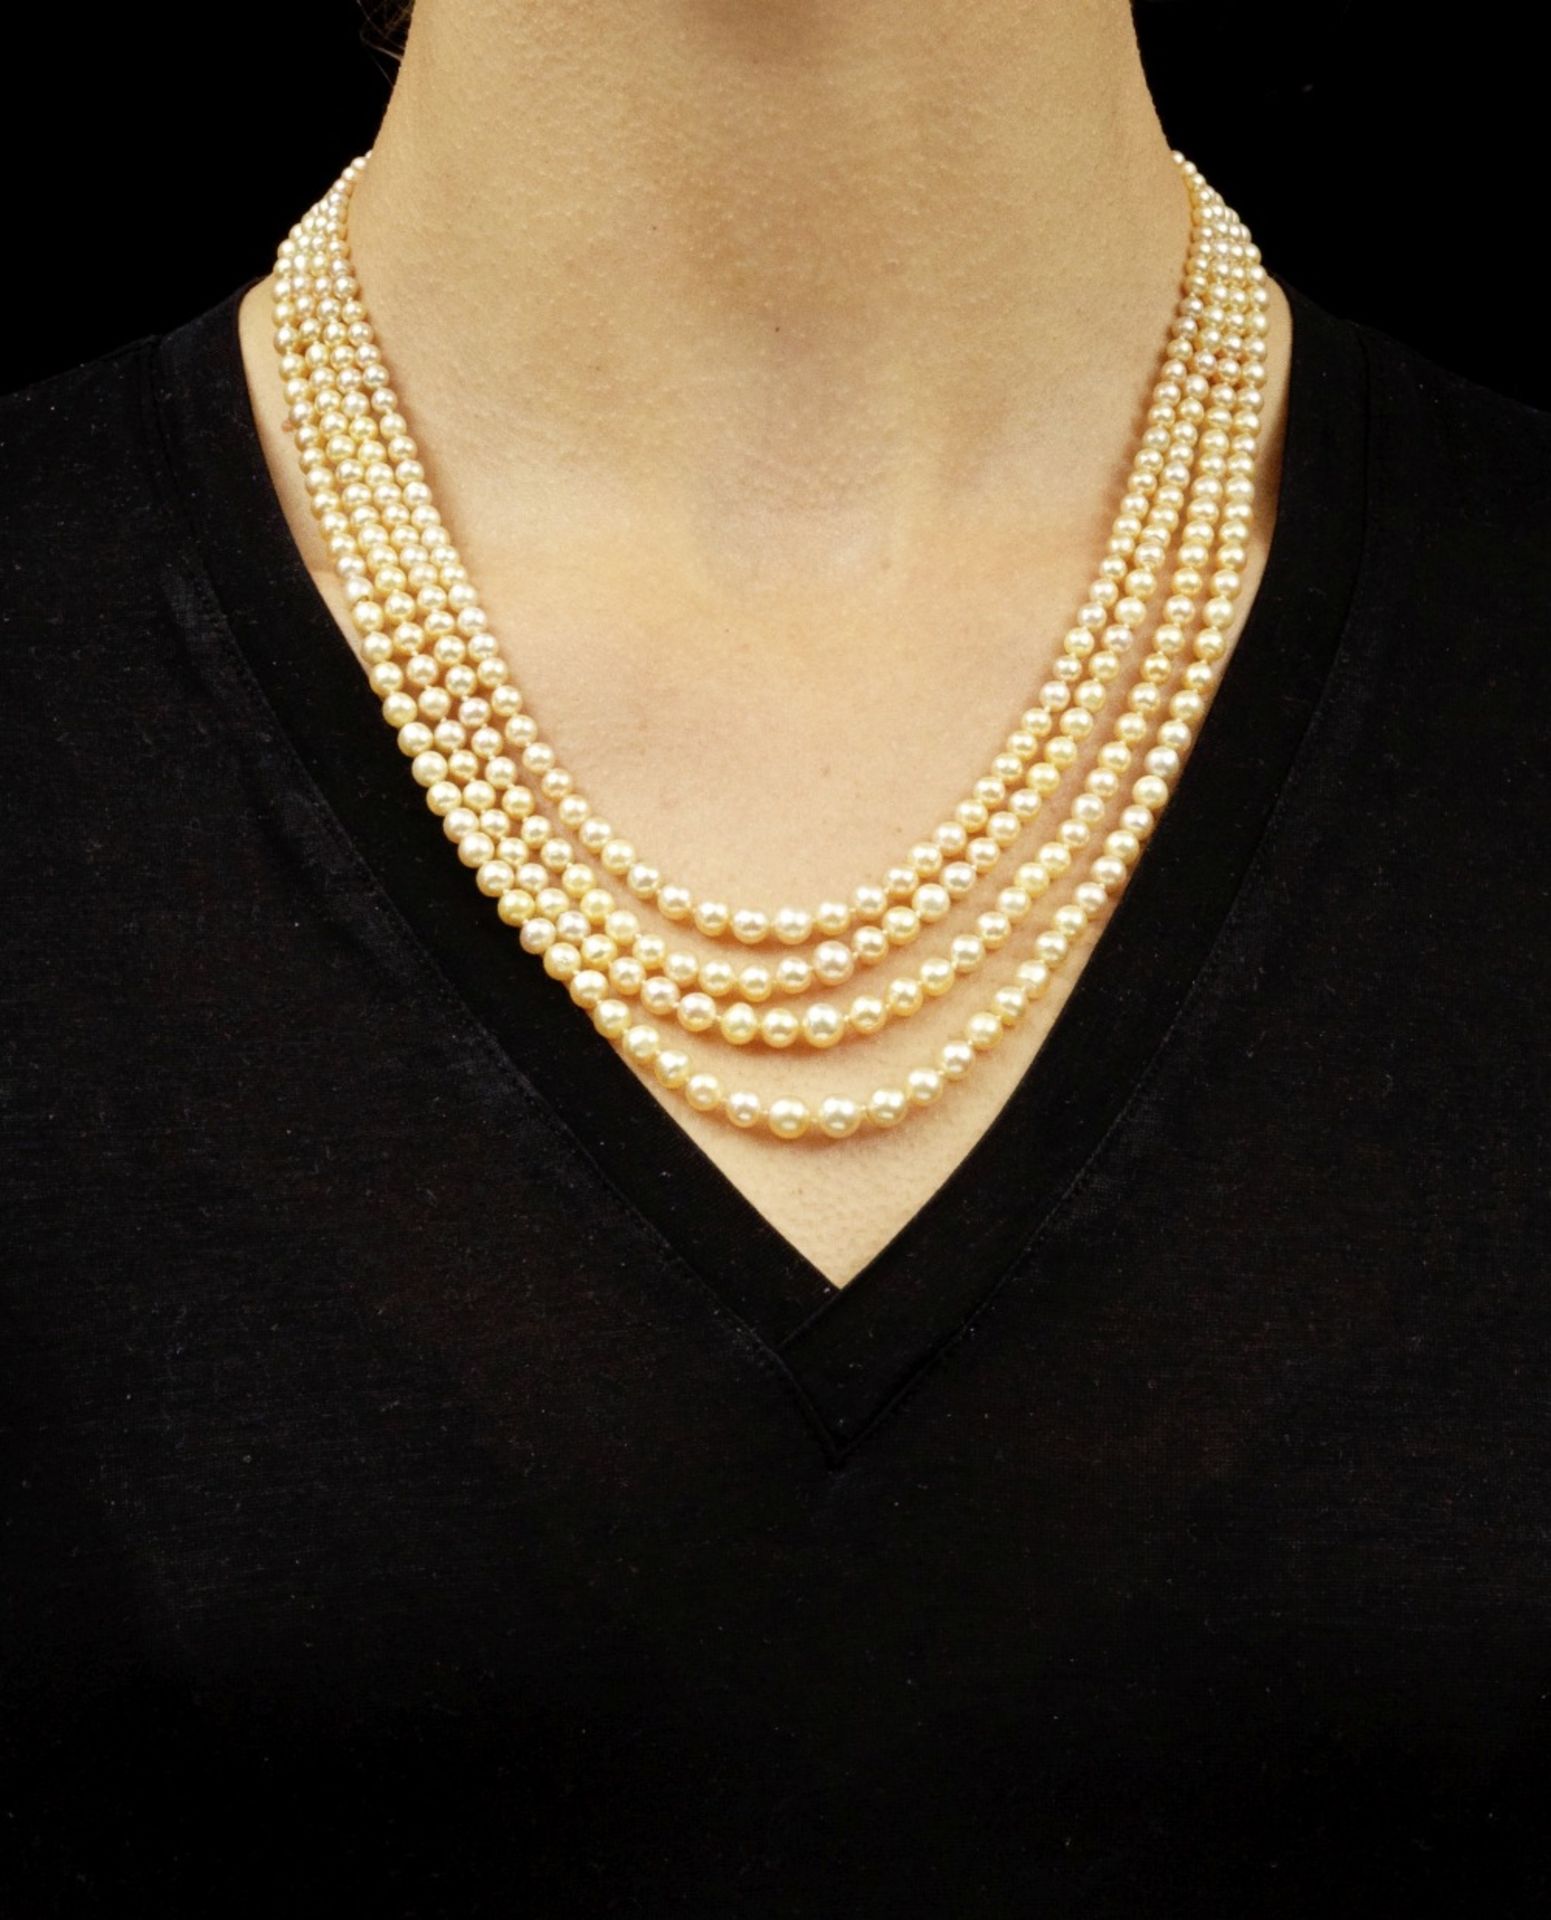 NATURAL PEARL AND DIAMOND NECKLACE - Image 2 of 2